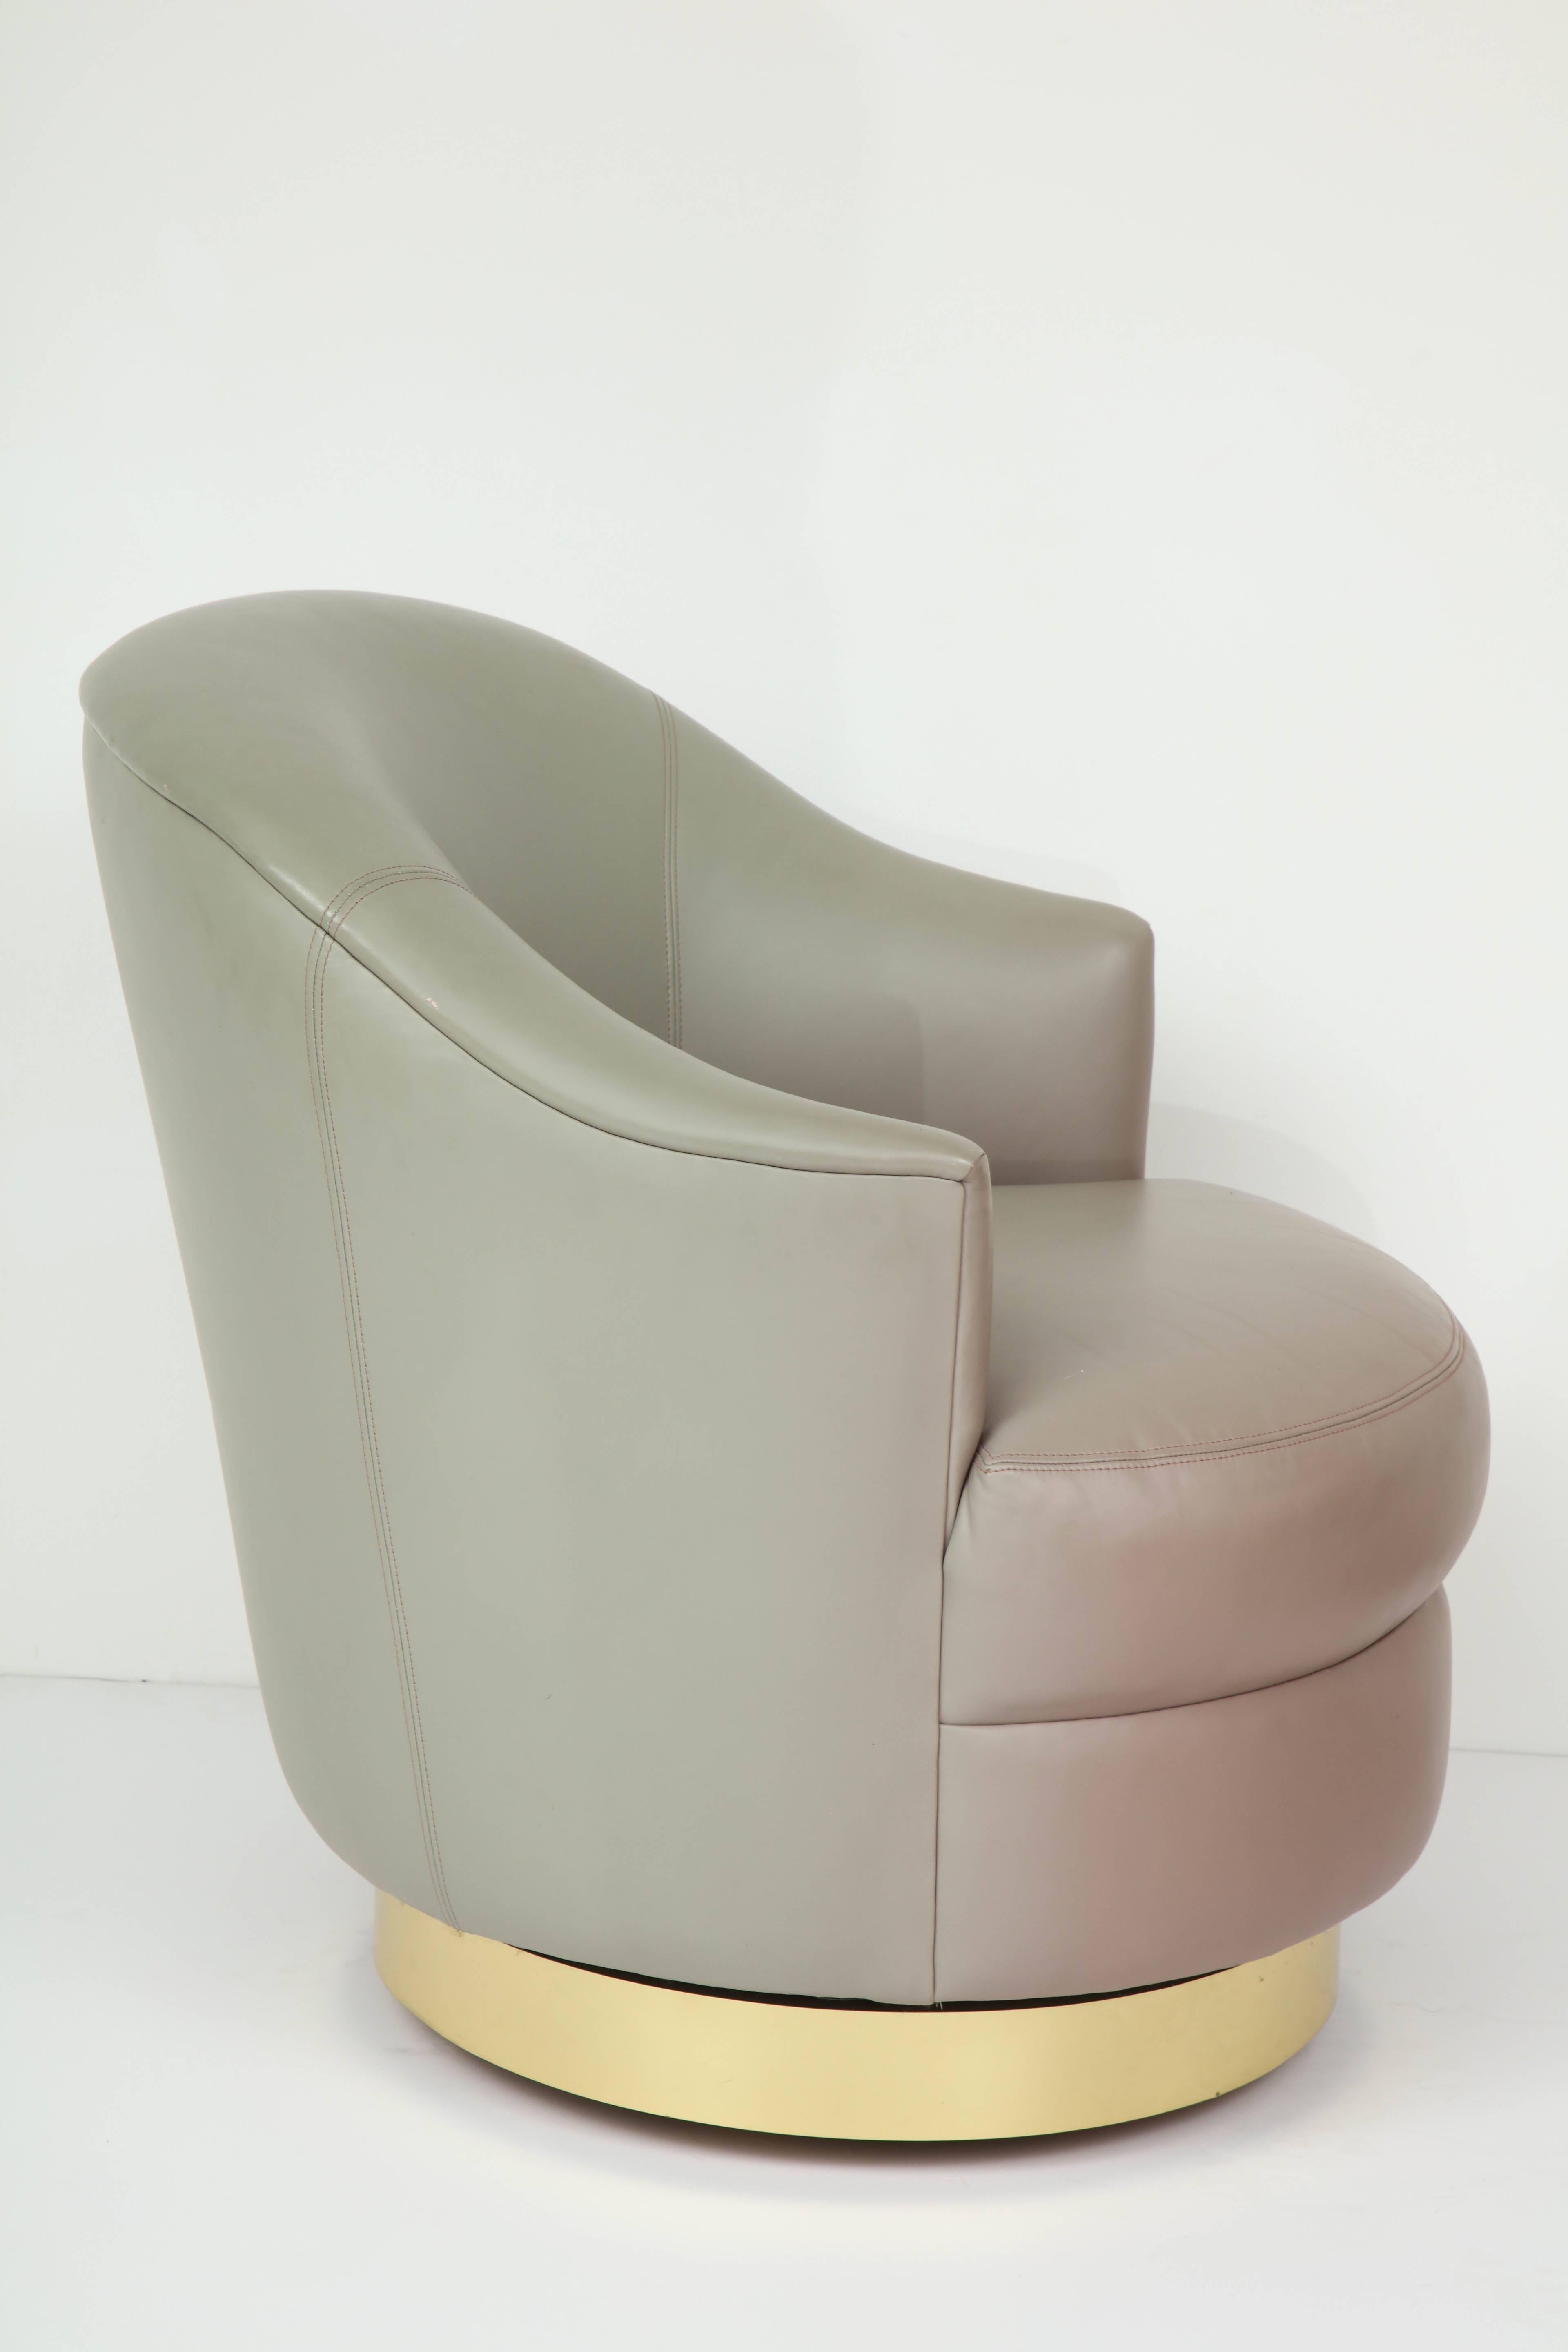 American Gray Ombre Leather Chair by Steve Chase For Sale